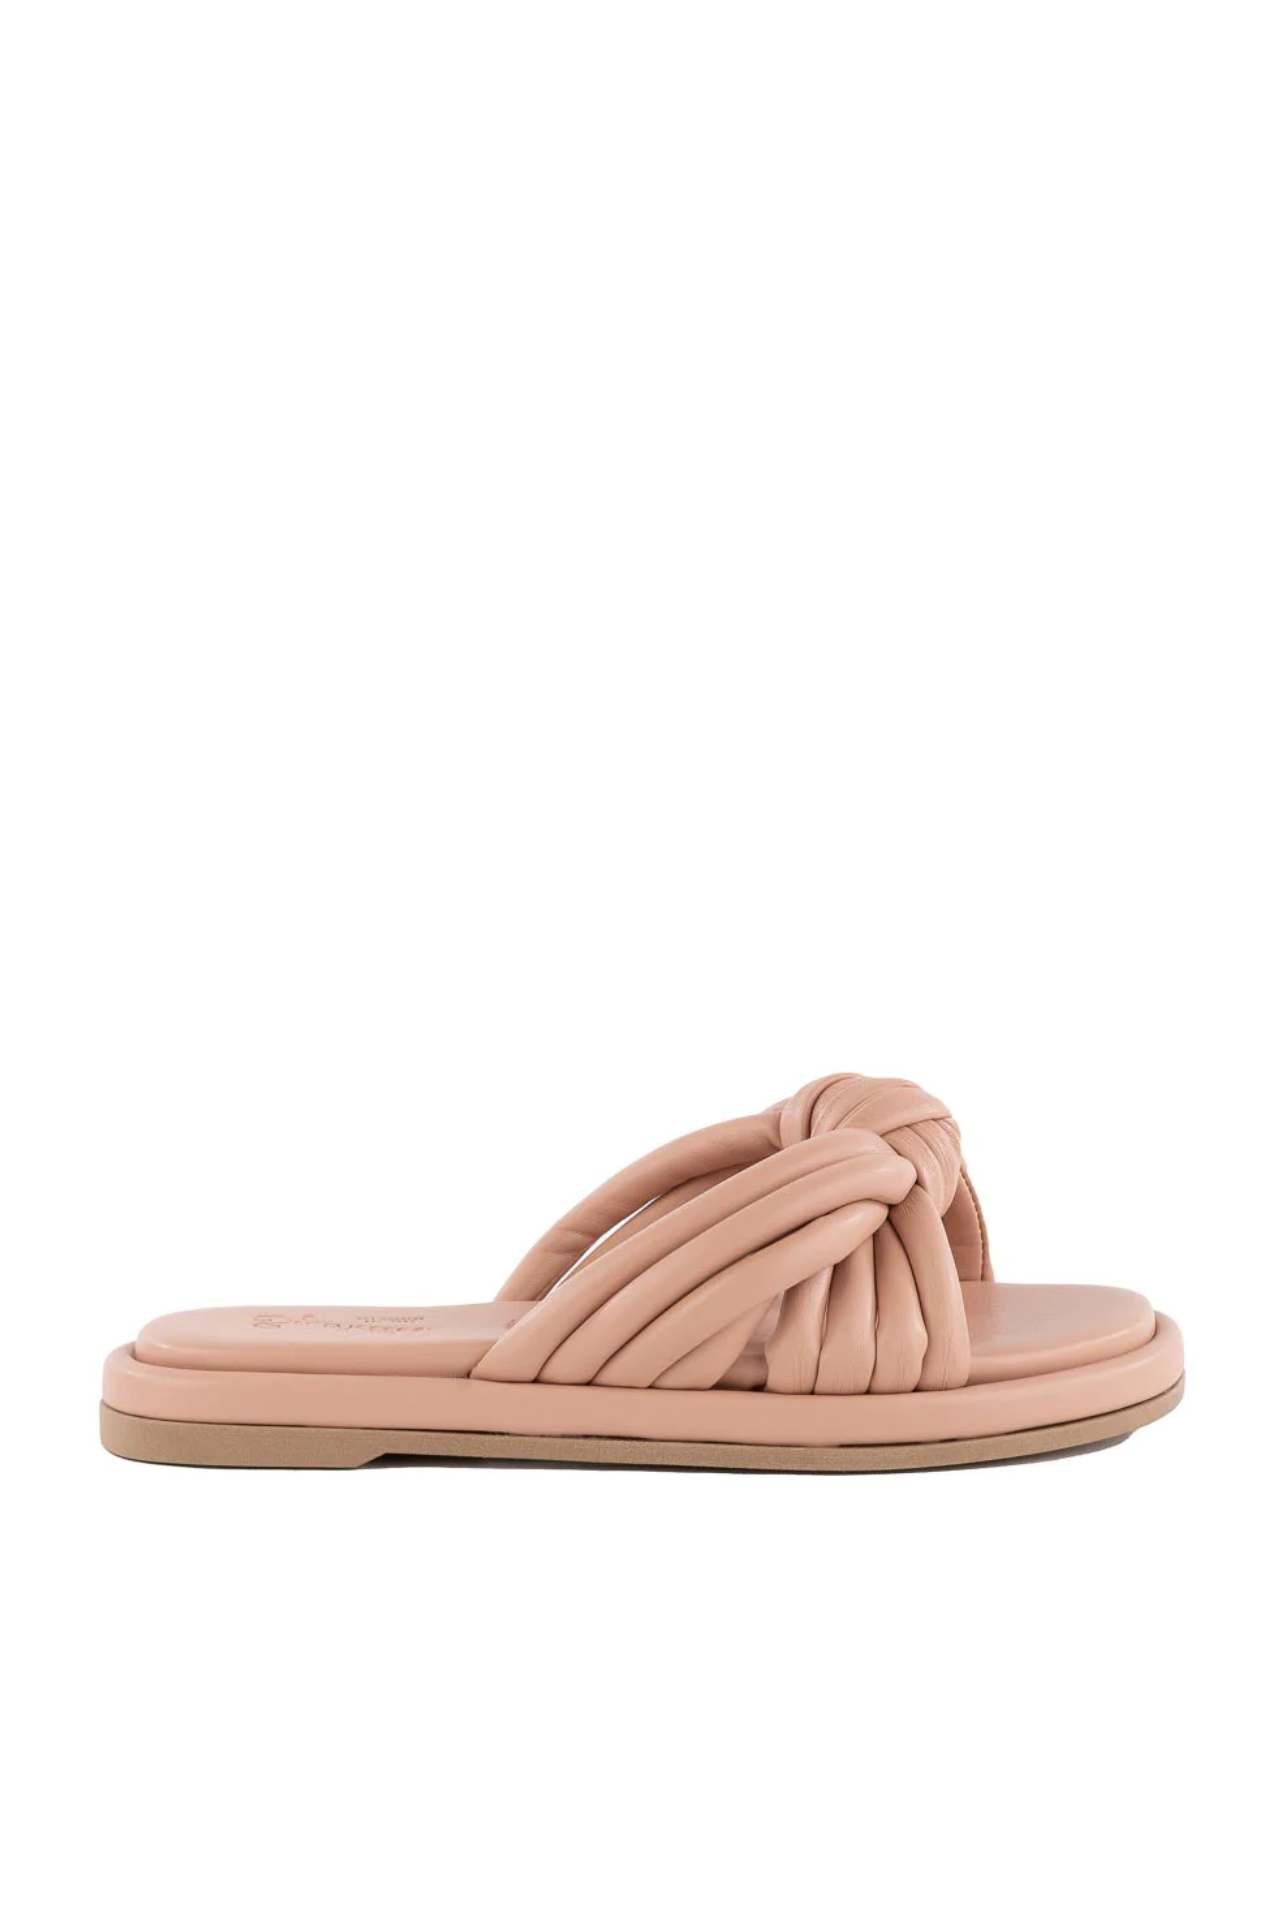 Simply the Best Sandal